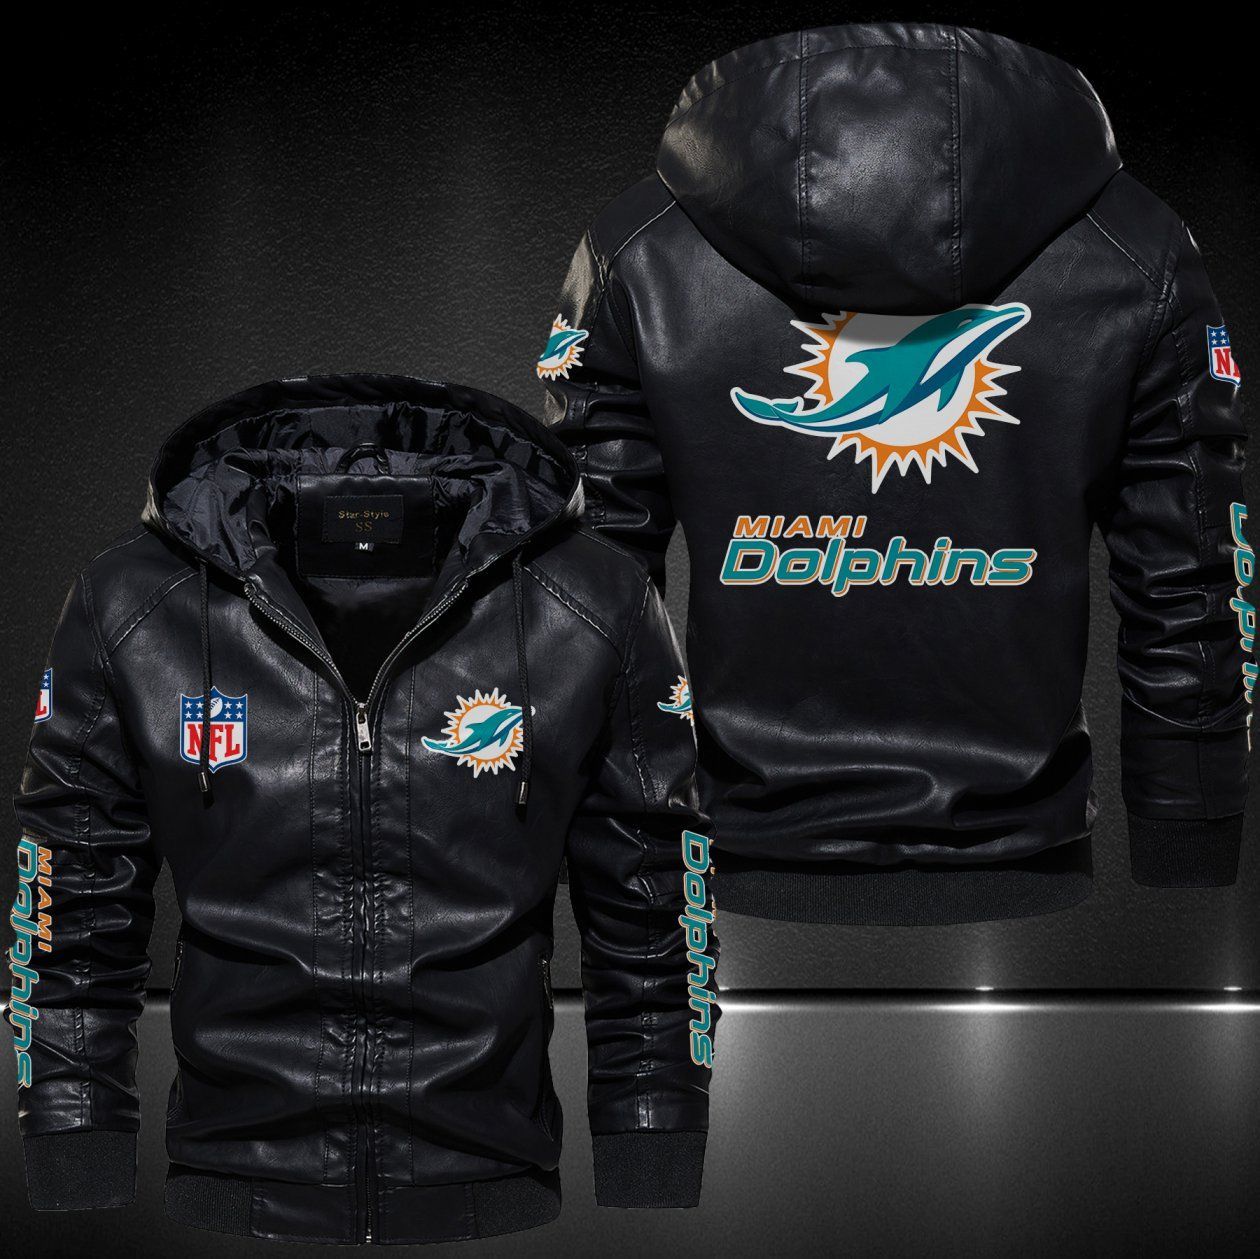 Miami Dolphins Hooded Leather Jacket 9088